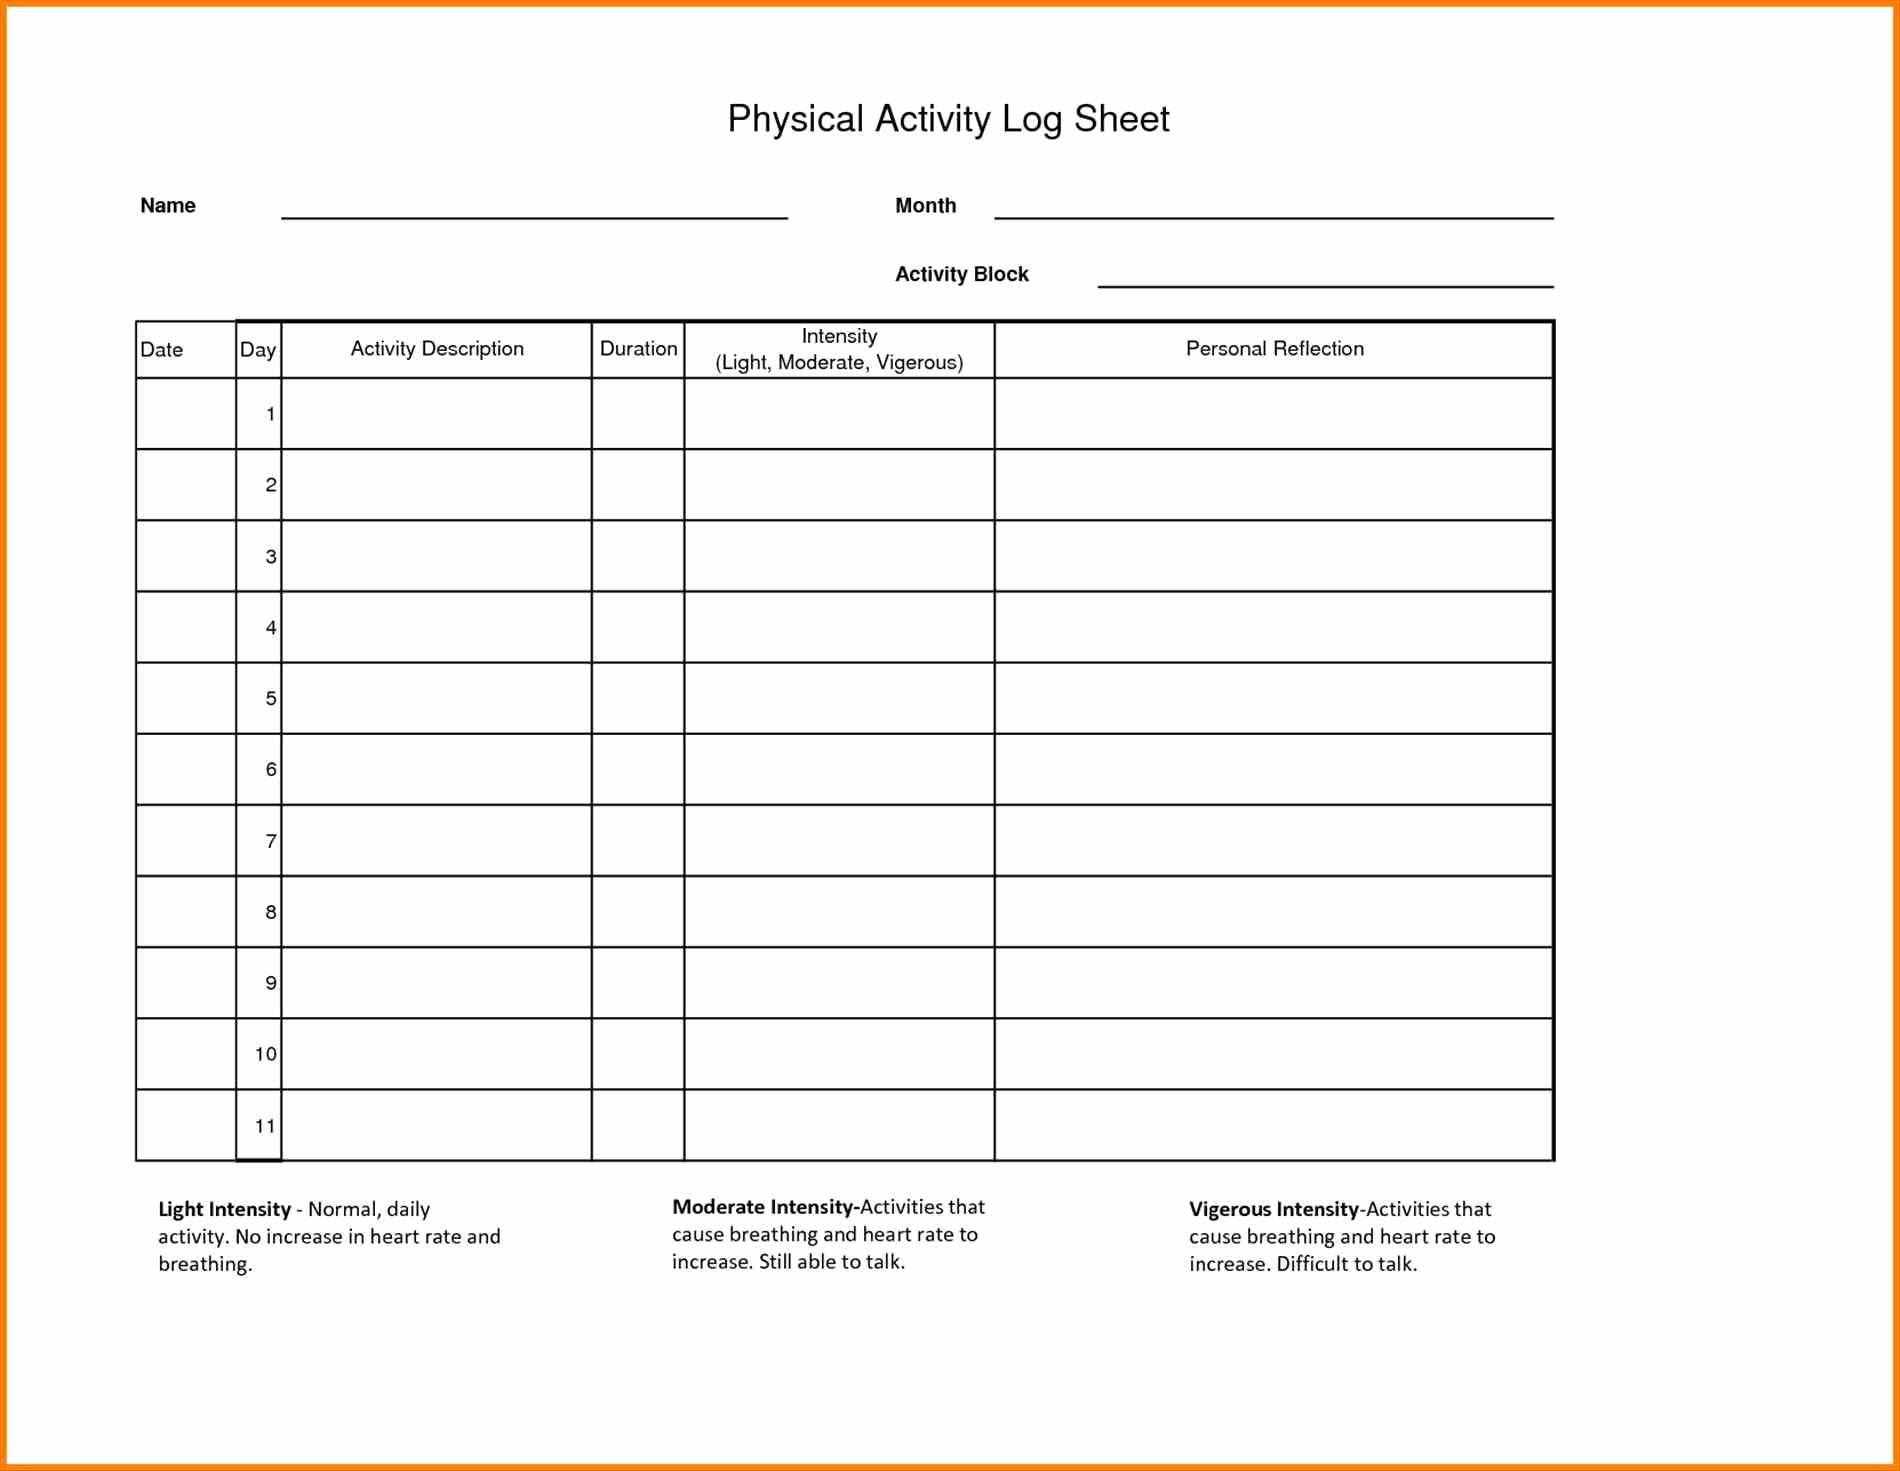 Physical Inventory Count Sheet Templates Best Of Physical Inventory Log Sheet Inventory Count Sheet – Tmplts